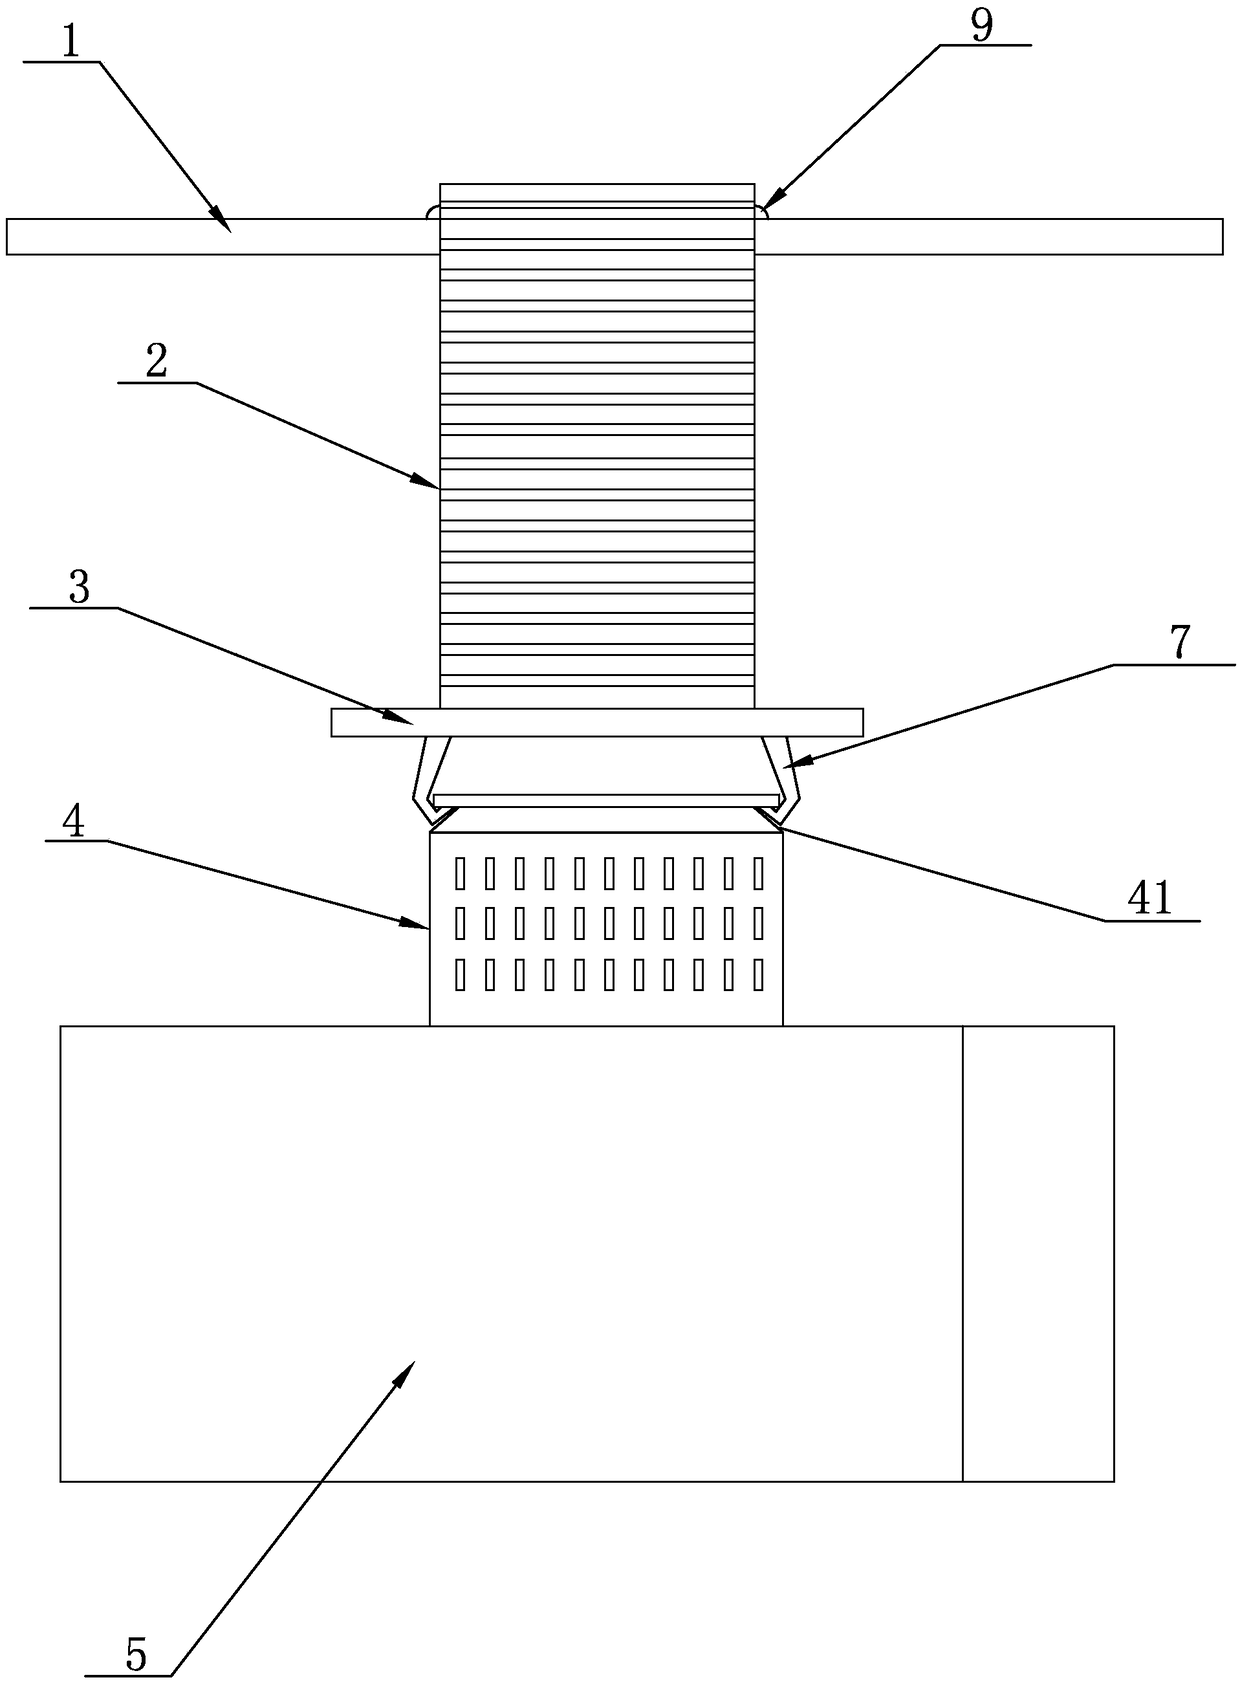 An electroplating passivation device